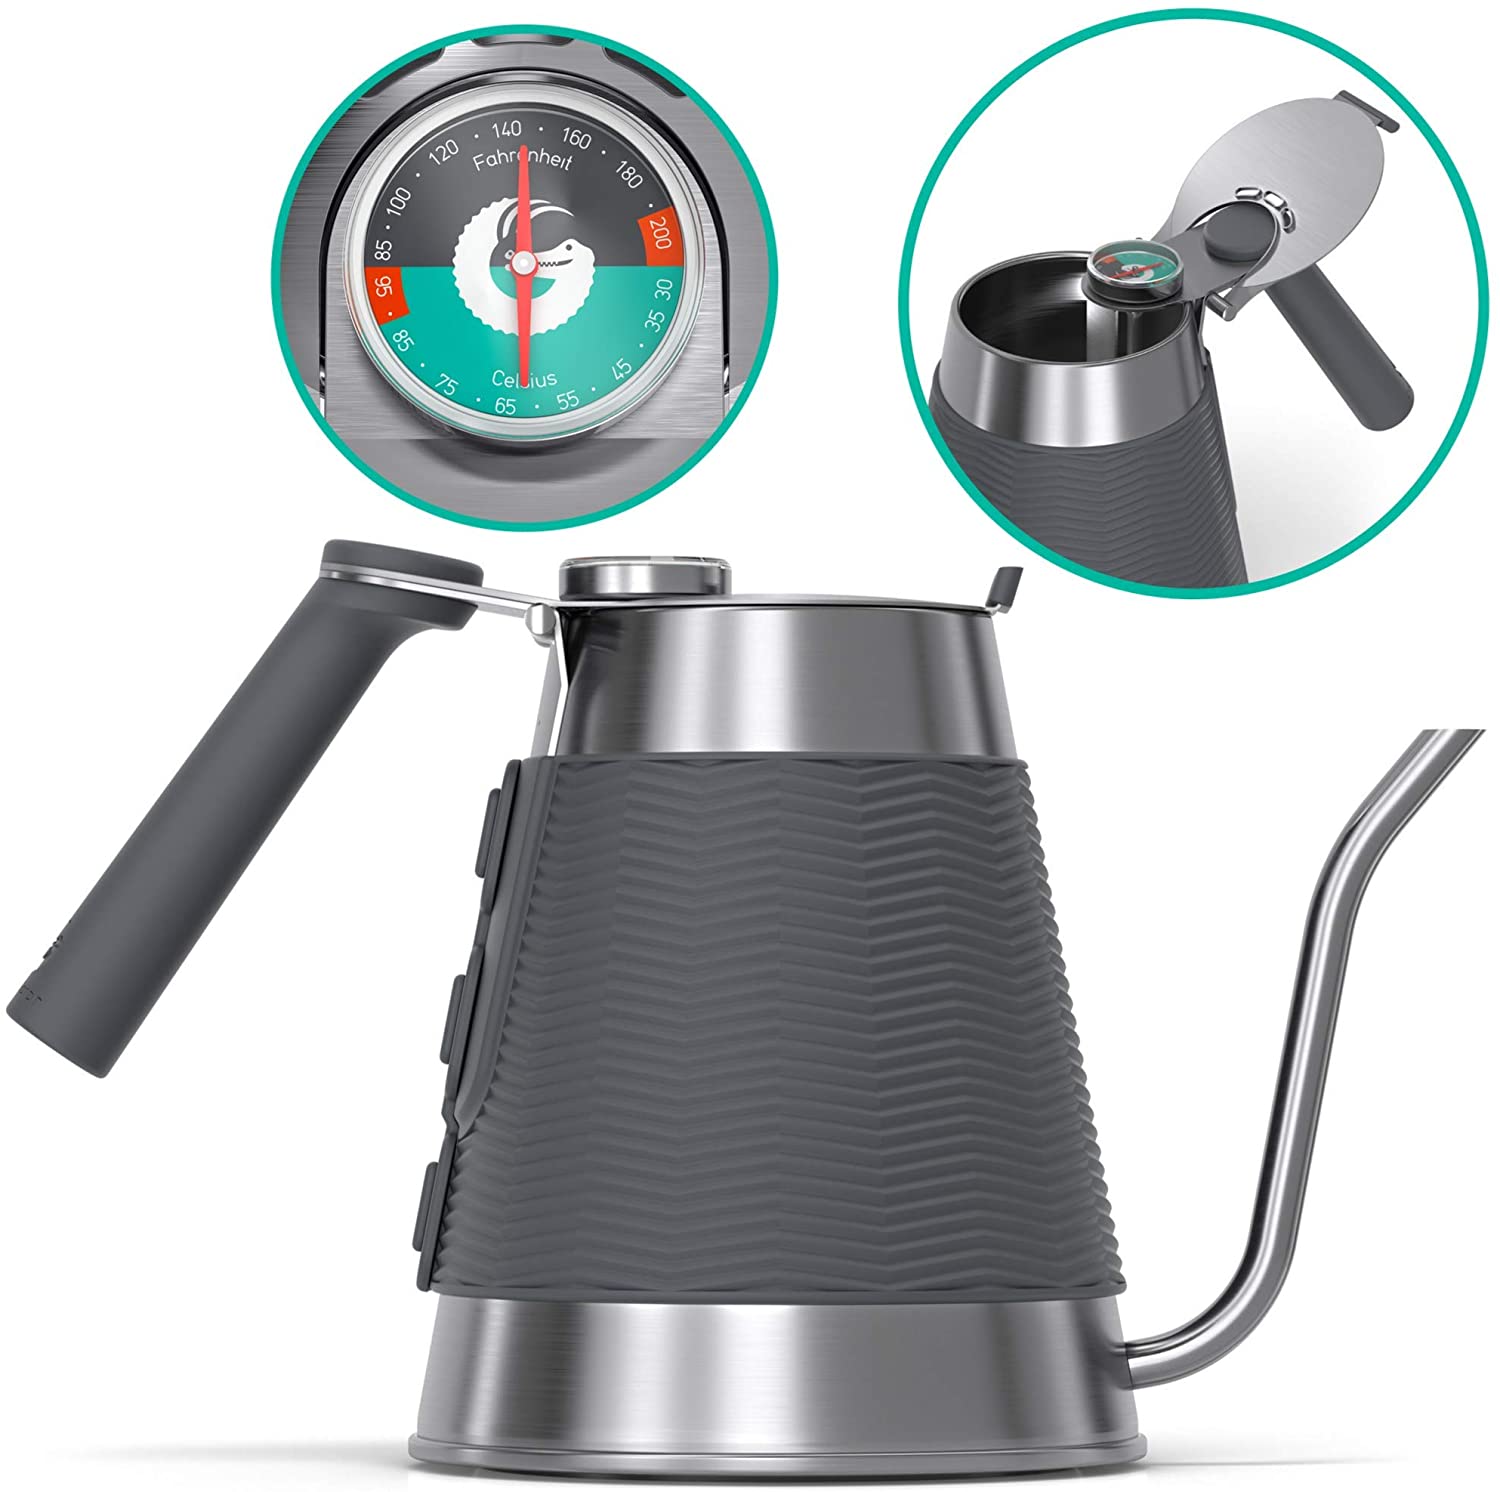 3. Coffee Gator Gooseneck Kettle with Thermometer